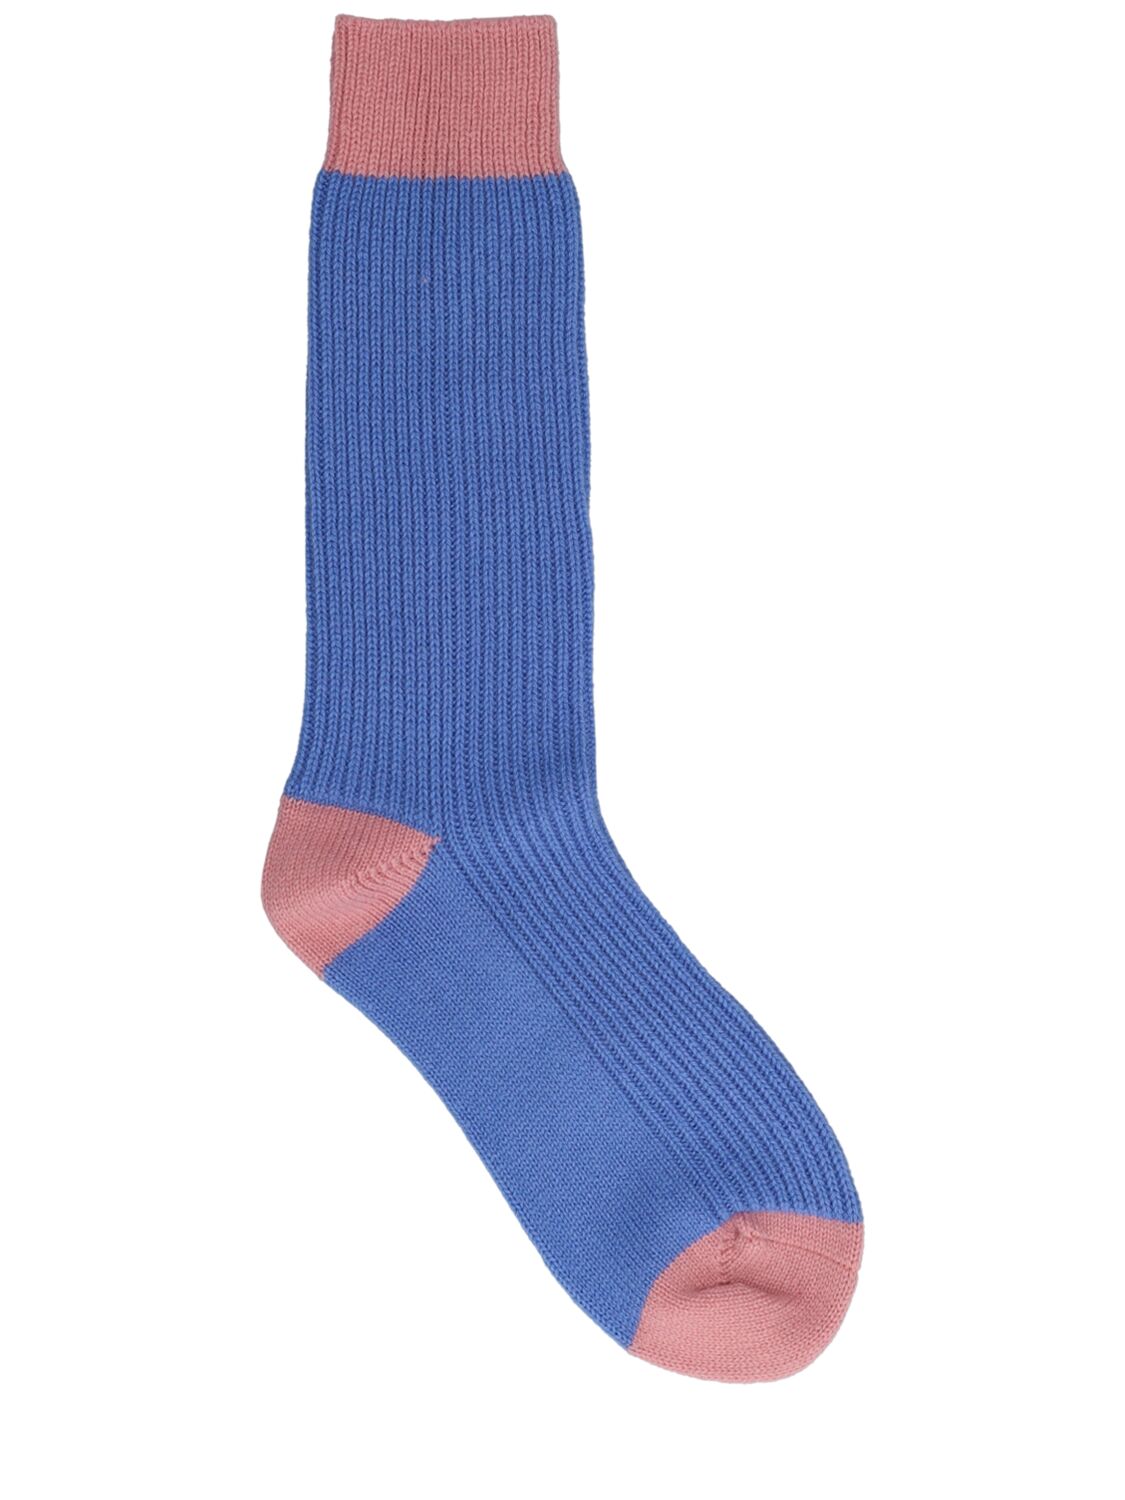 Guest In Residence The Soft Cashmere Socks In Blue,pink